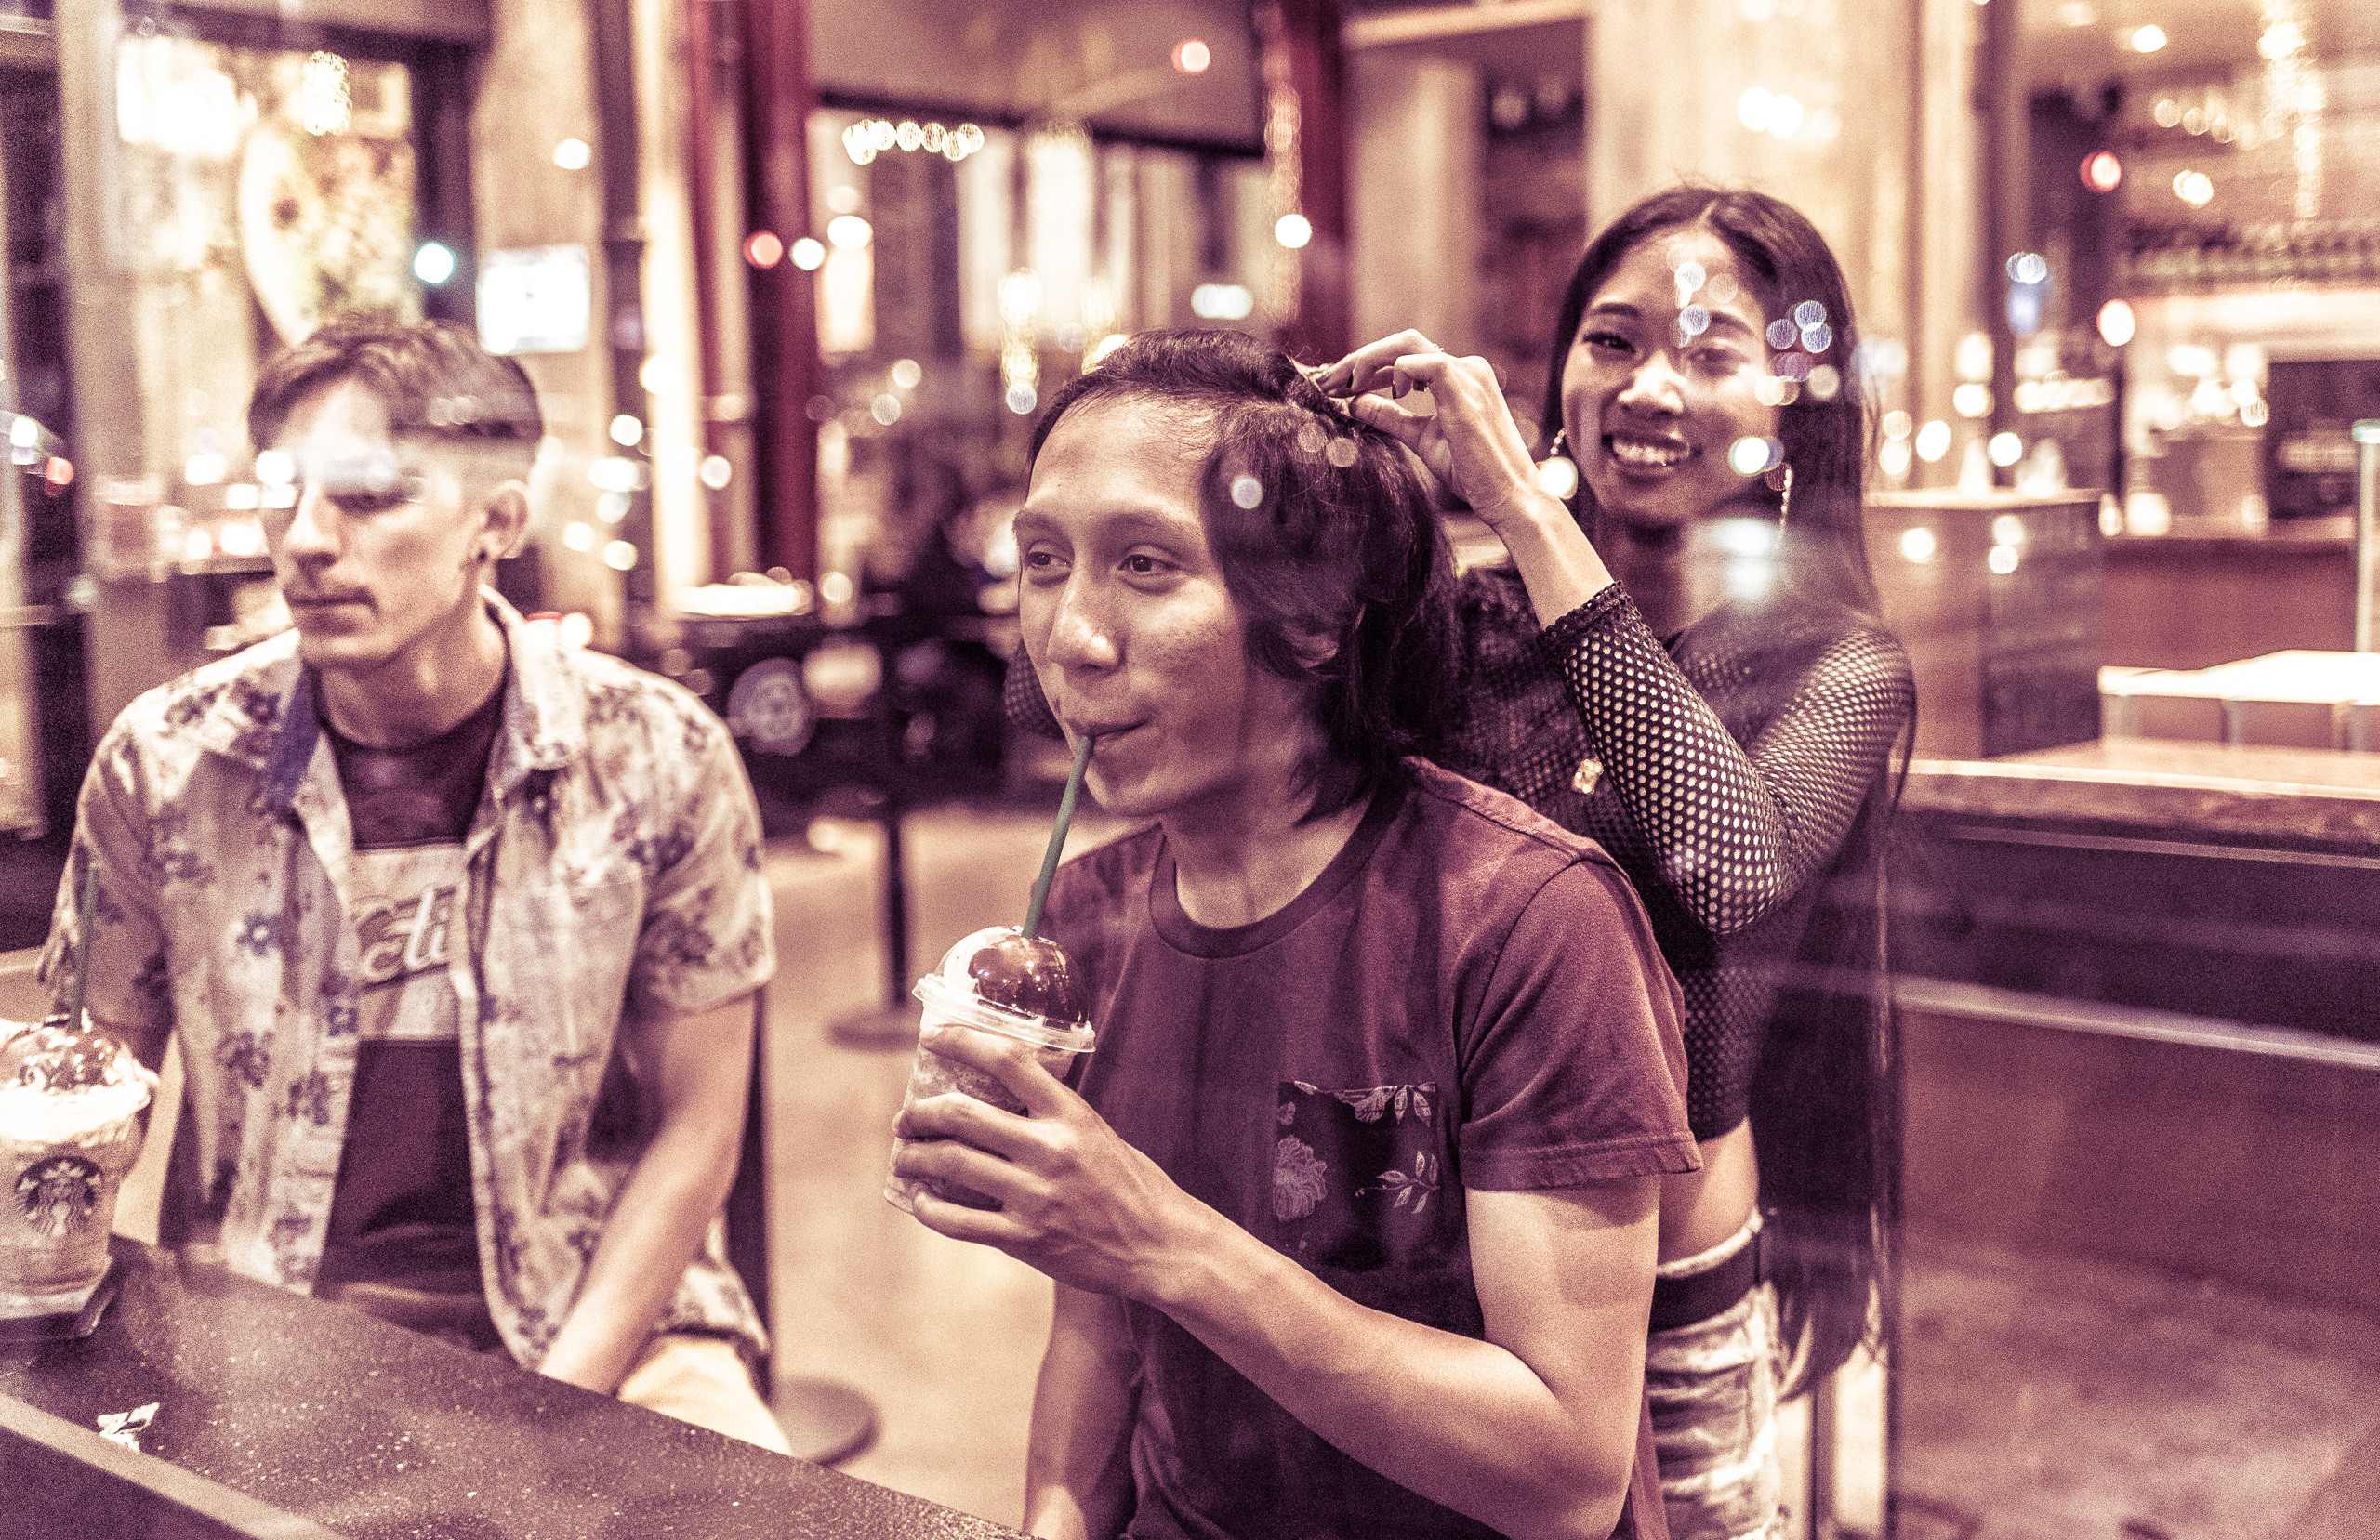 through the window of a Popeyes on Hollywood Blvd, a girl arranges her boyfriend's hair